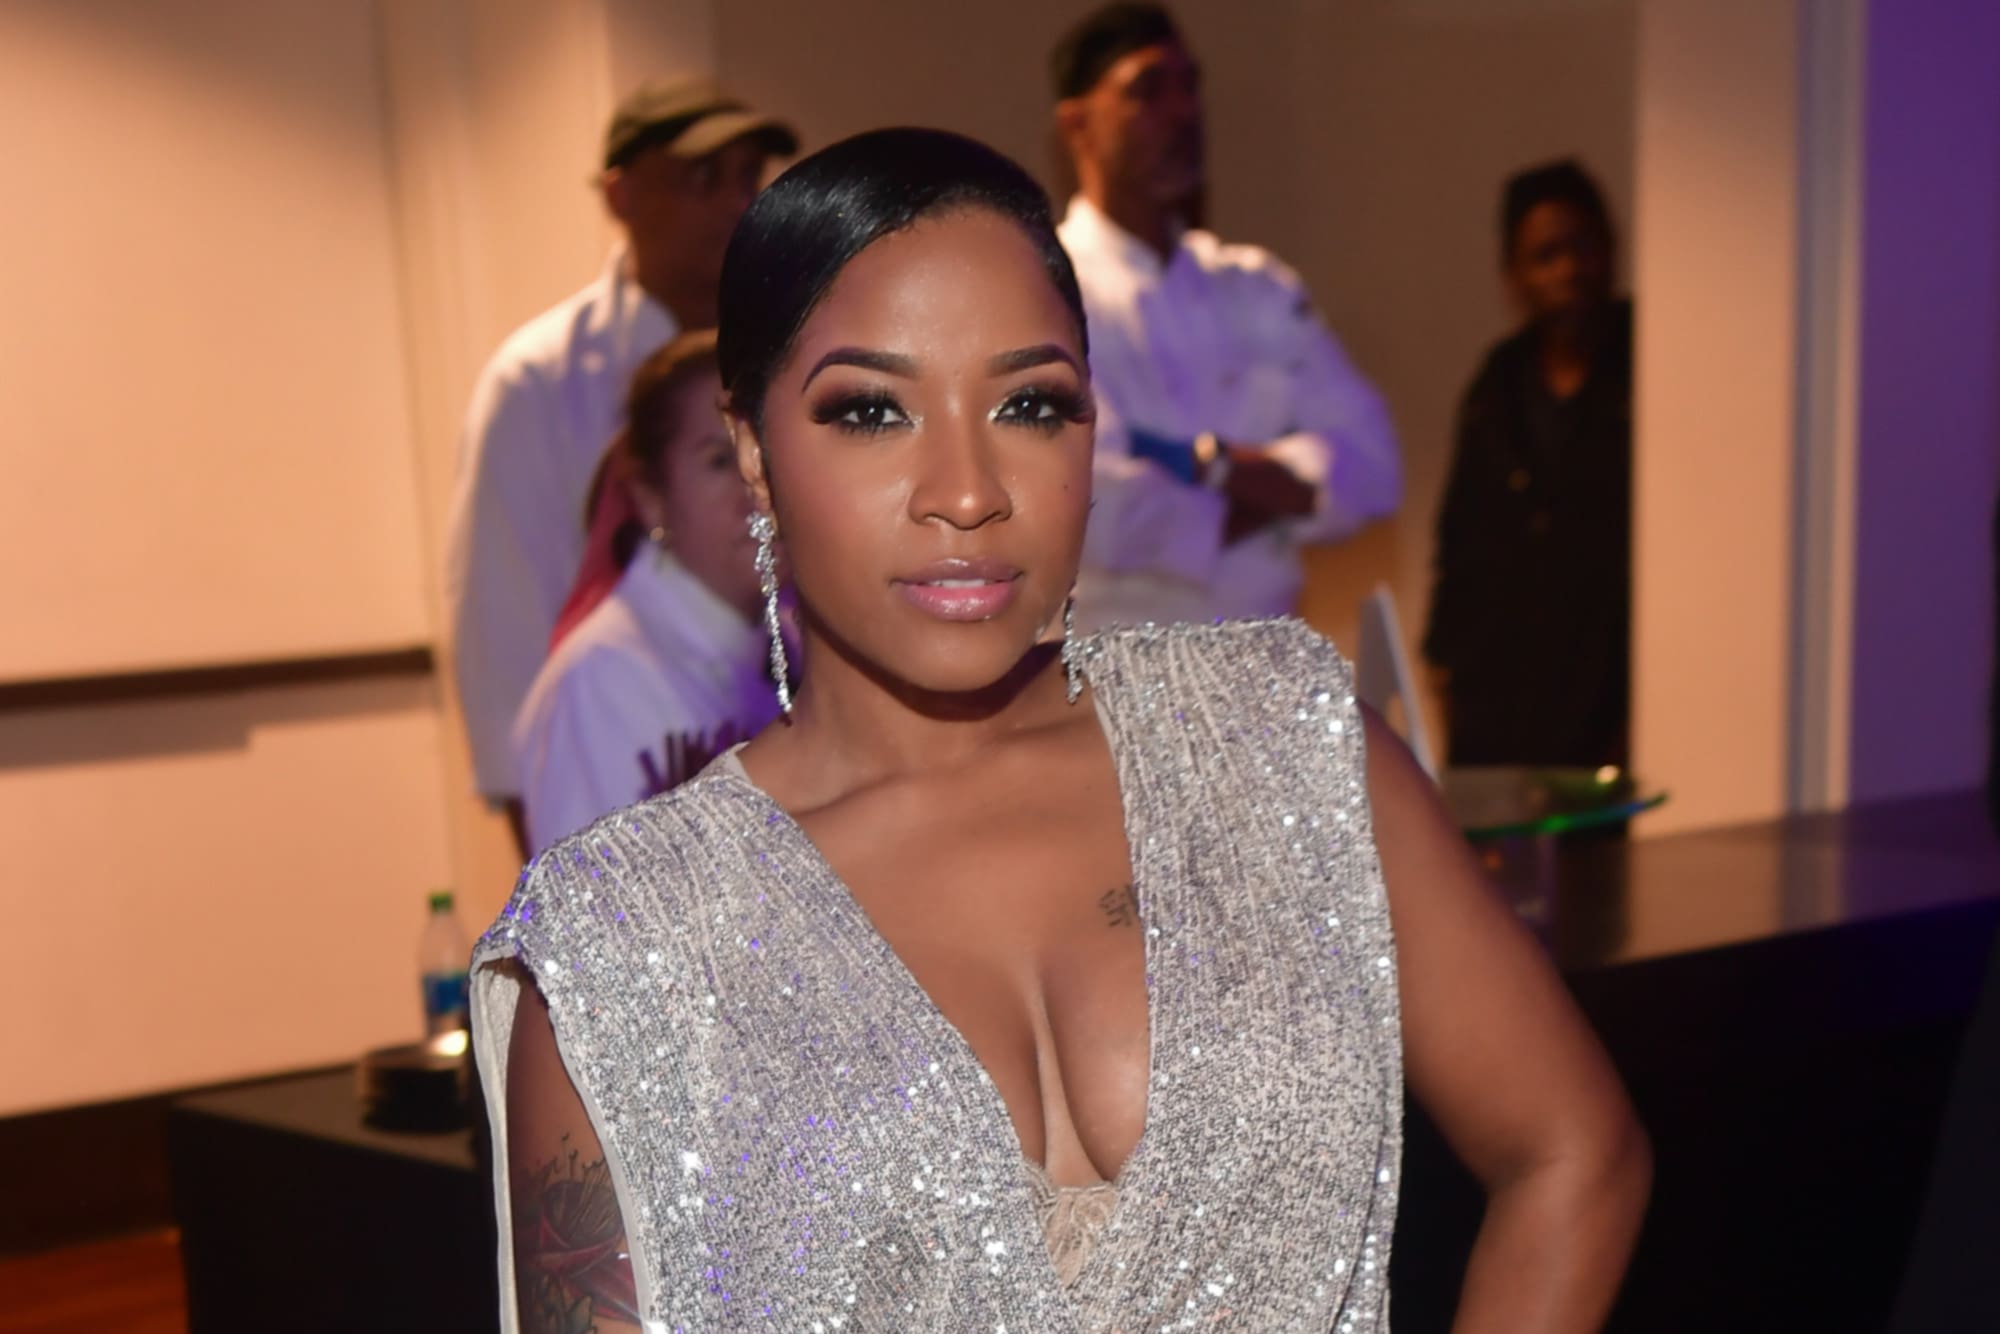 Toya Johnson Boosts Fans' Appetite With These Photos